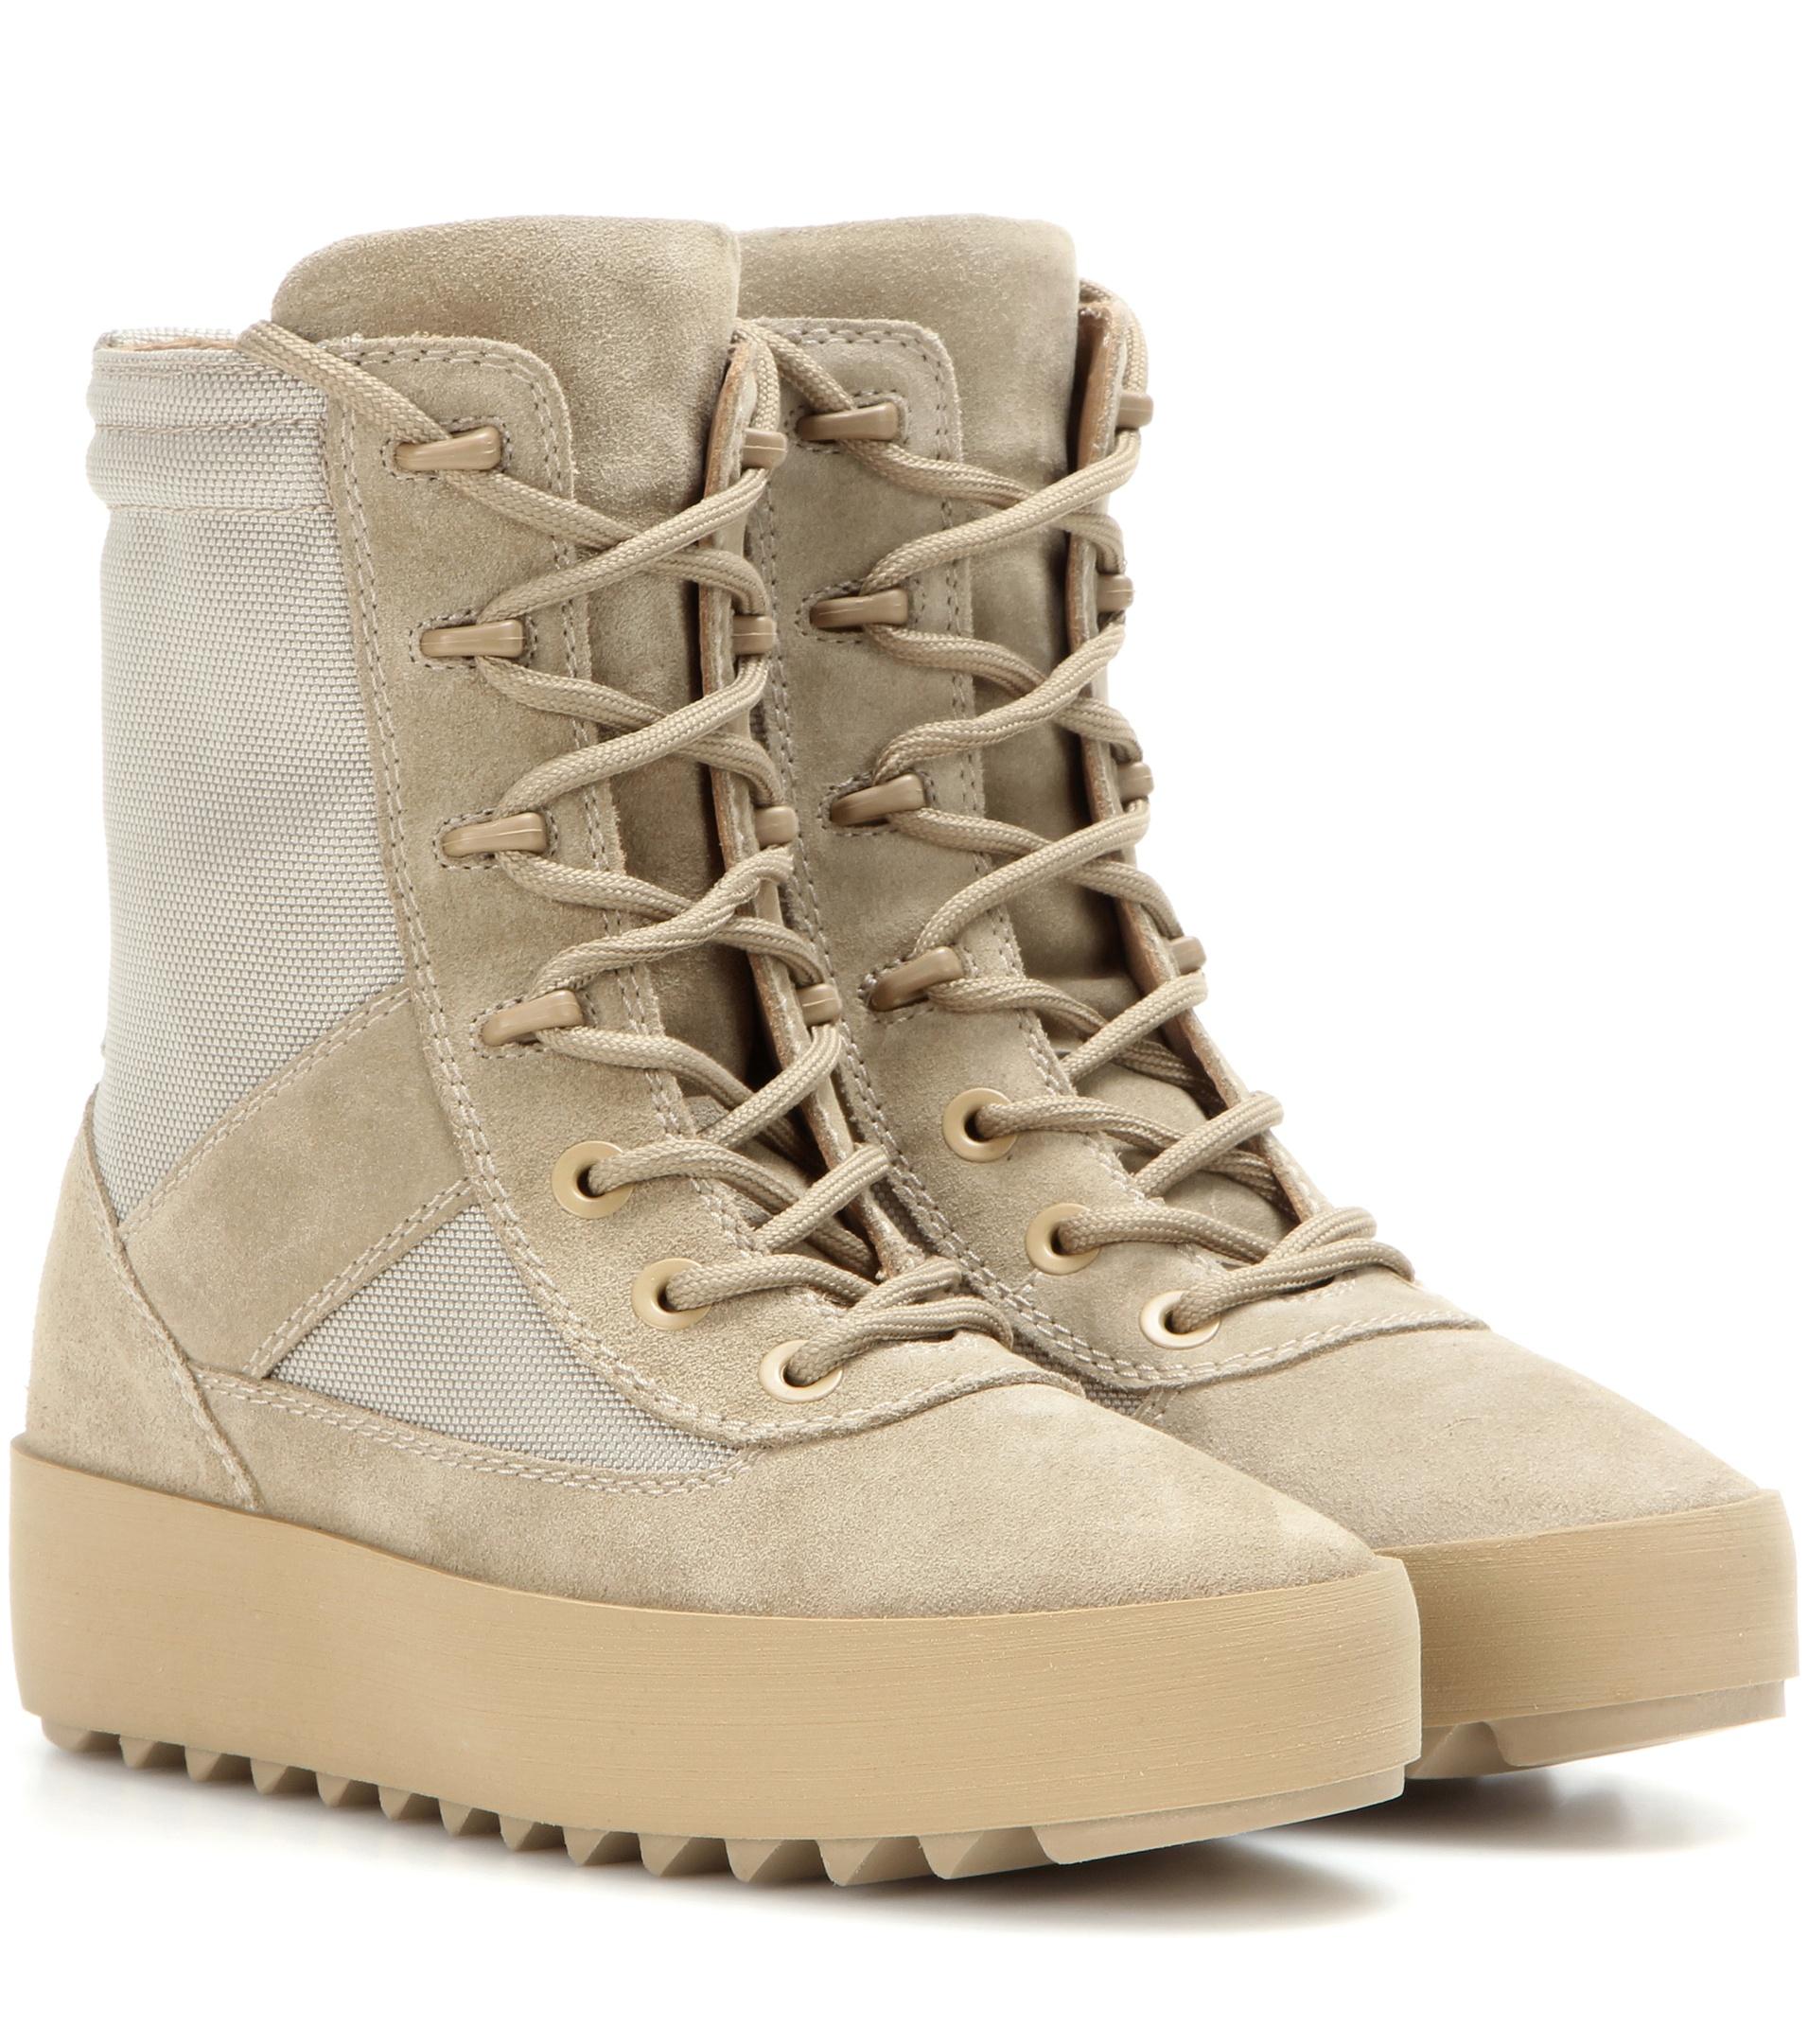 Yeezy Military Suede Ankle Boots in Beige (Natural) - Lyst